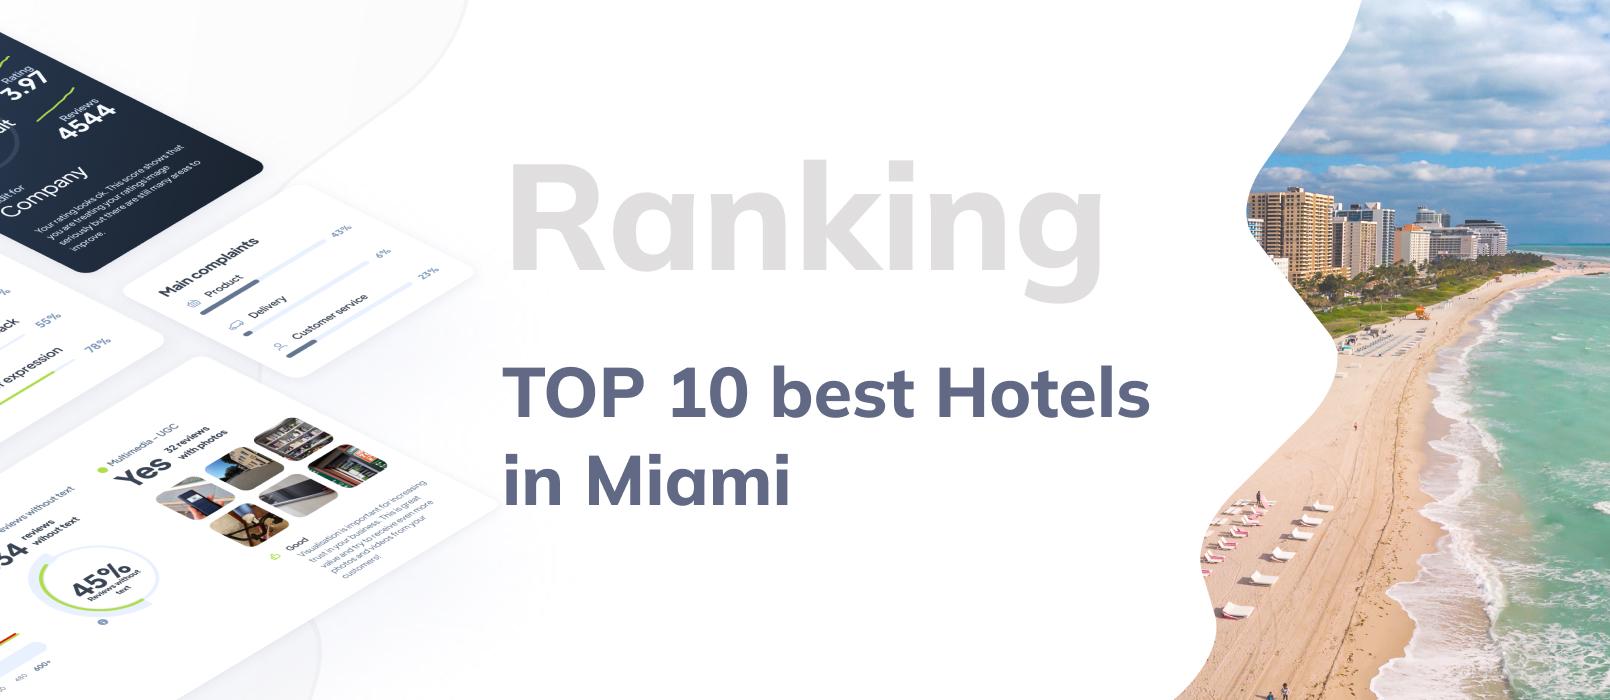 Best hotels in Miami - list of TOP 10 hotels in Miami